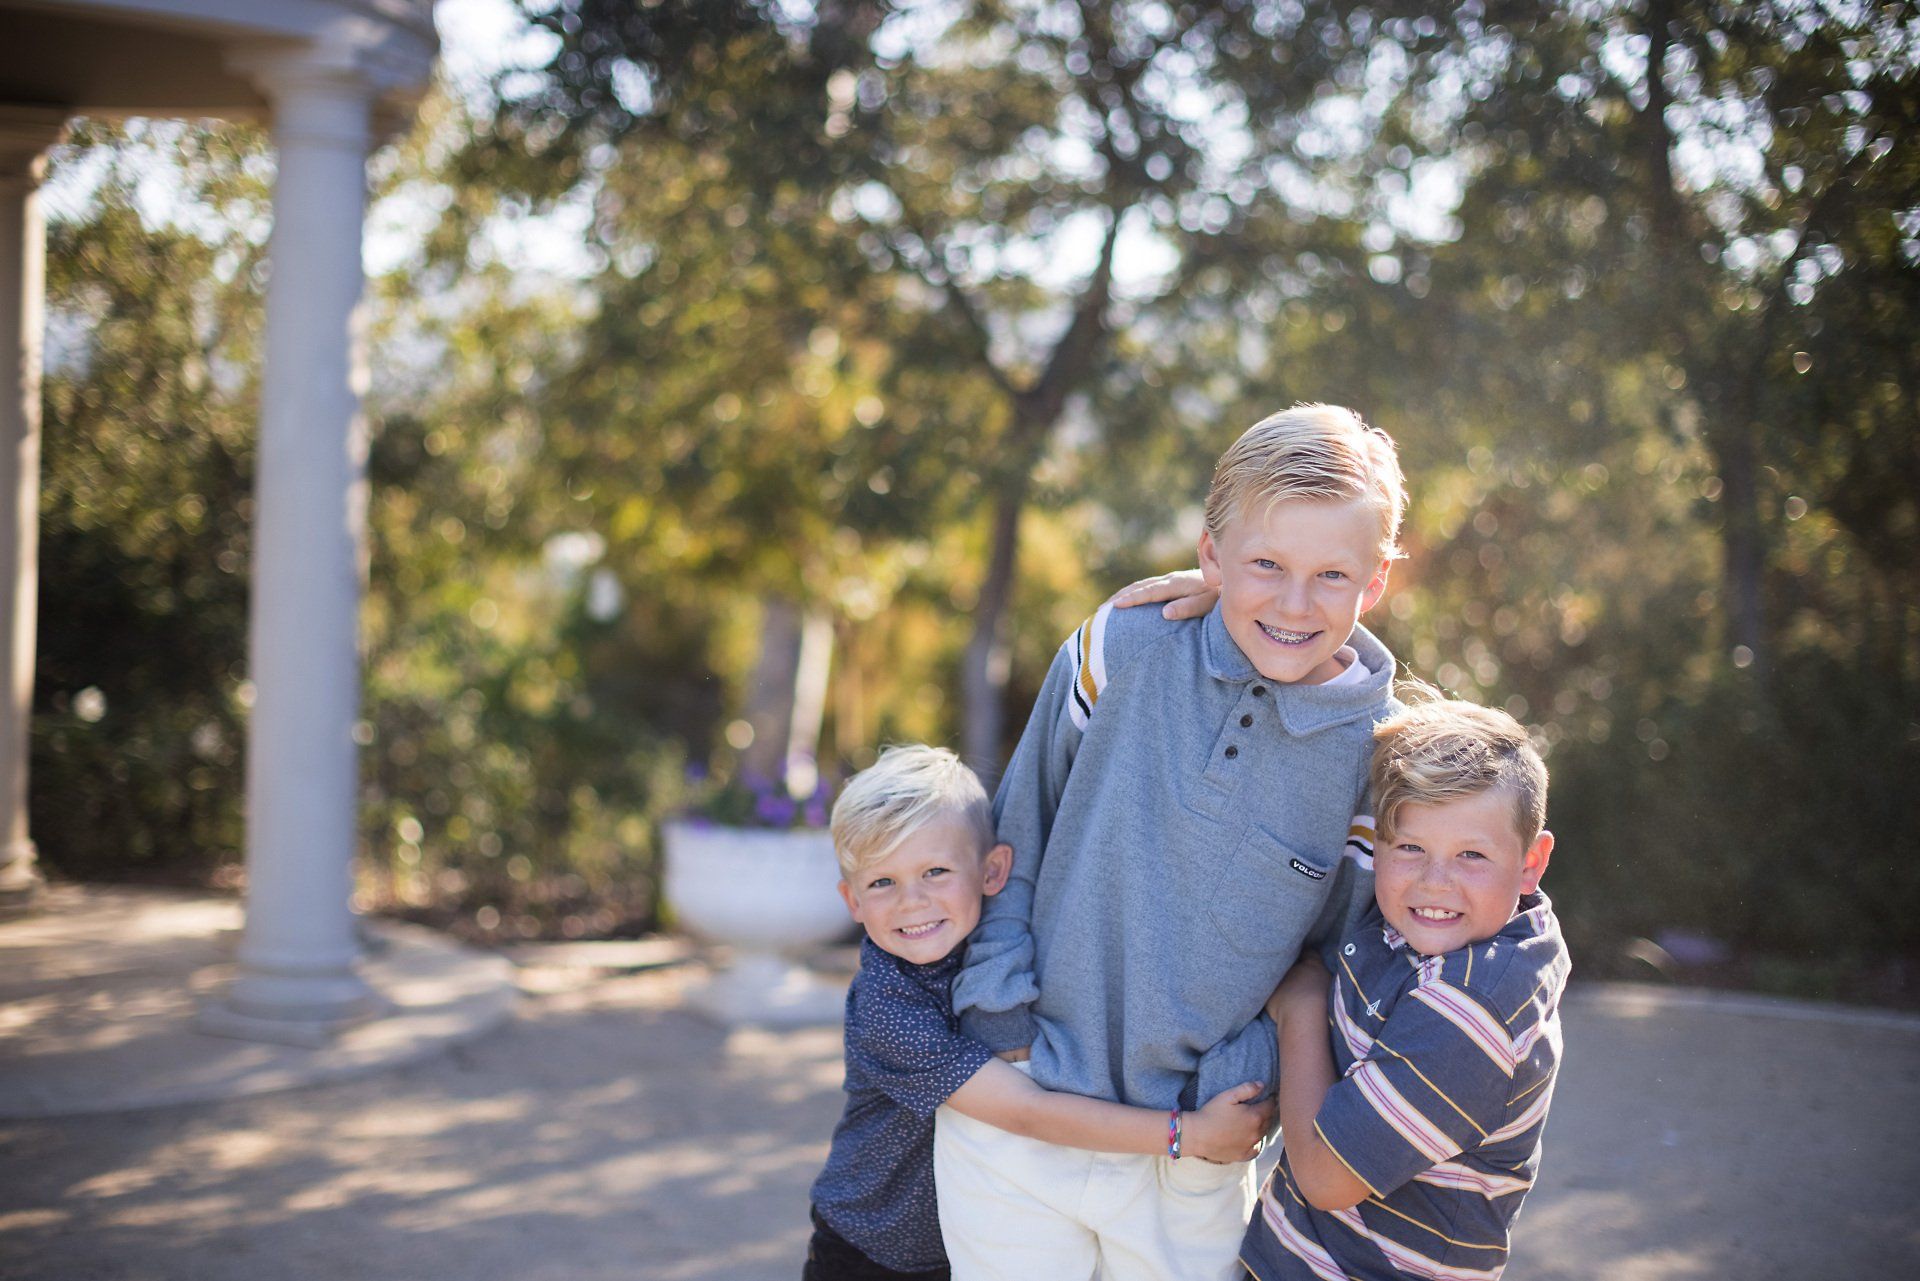 Boy at a family photography session in Laguna Niguel Botanical Gardens  giving each other a big hug.